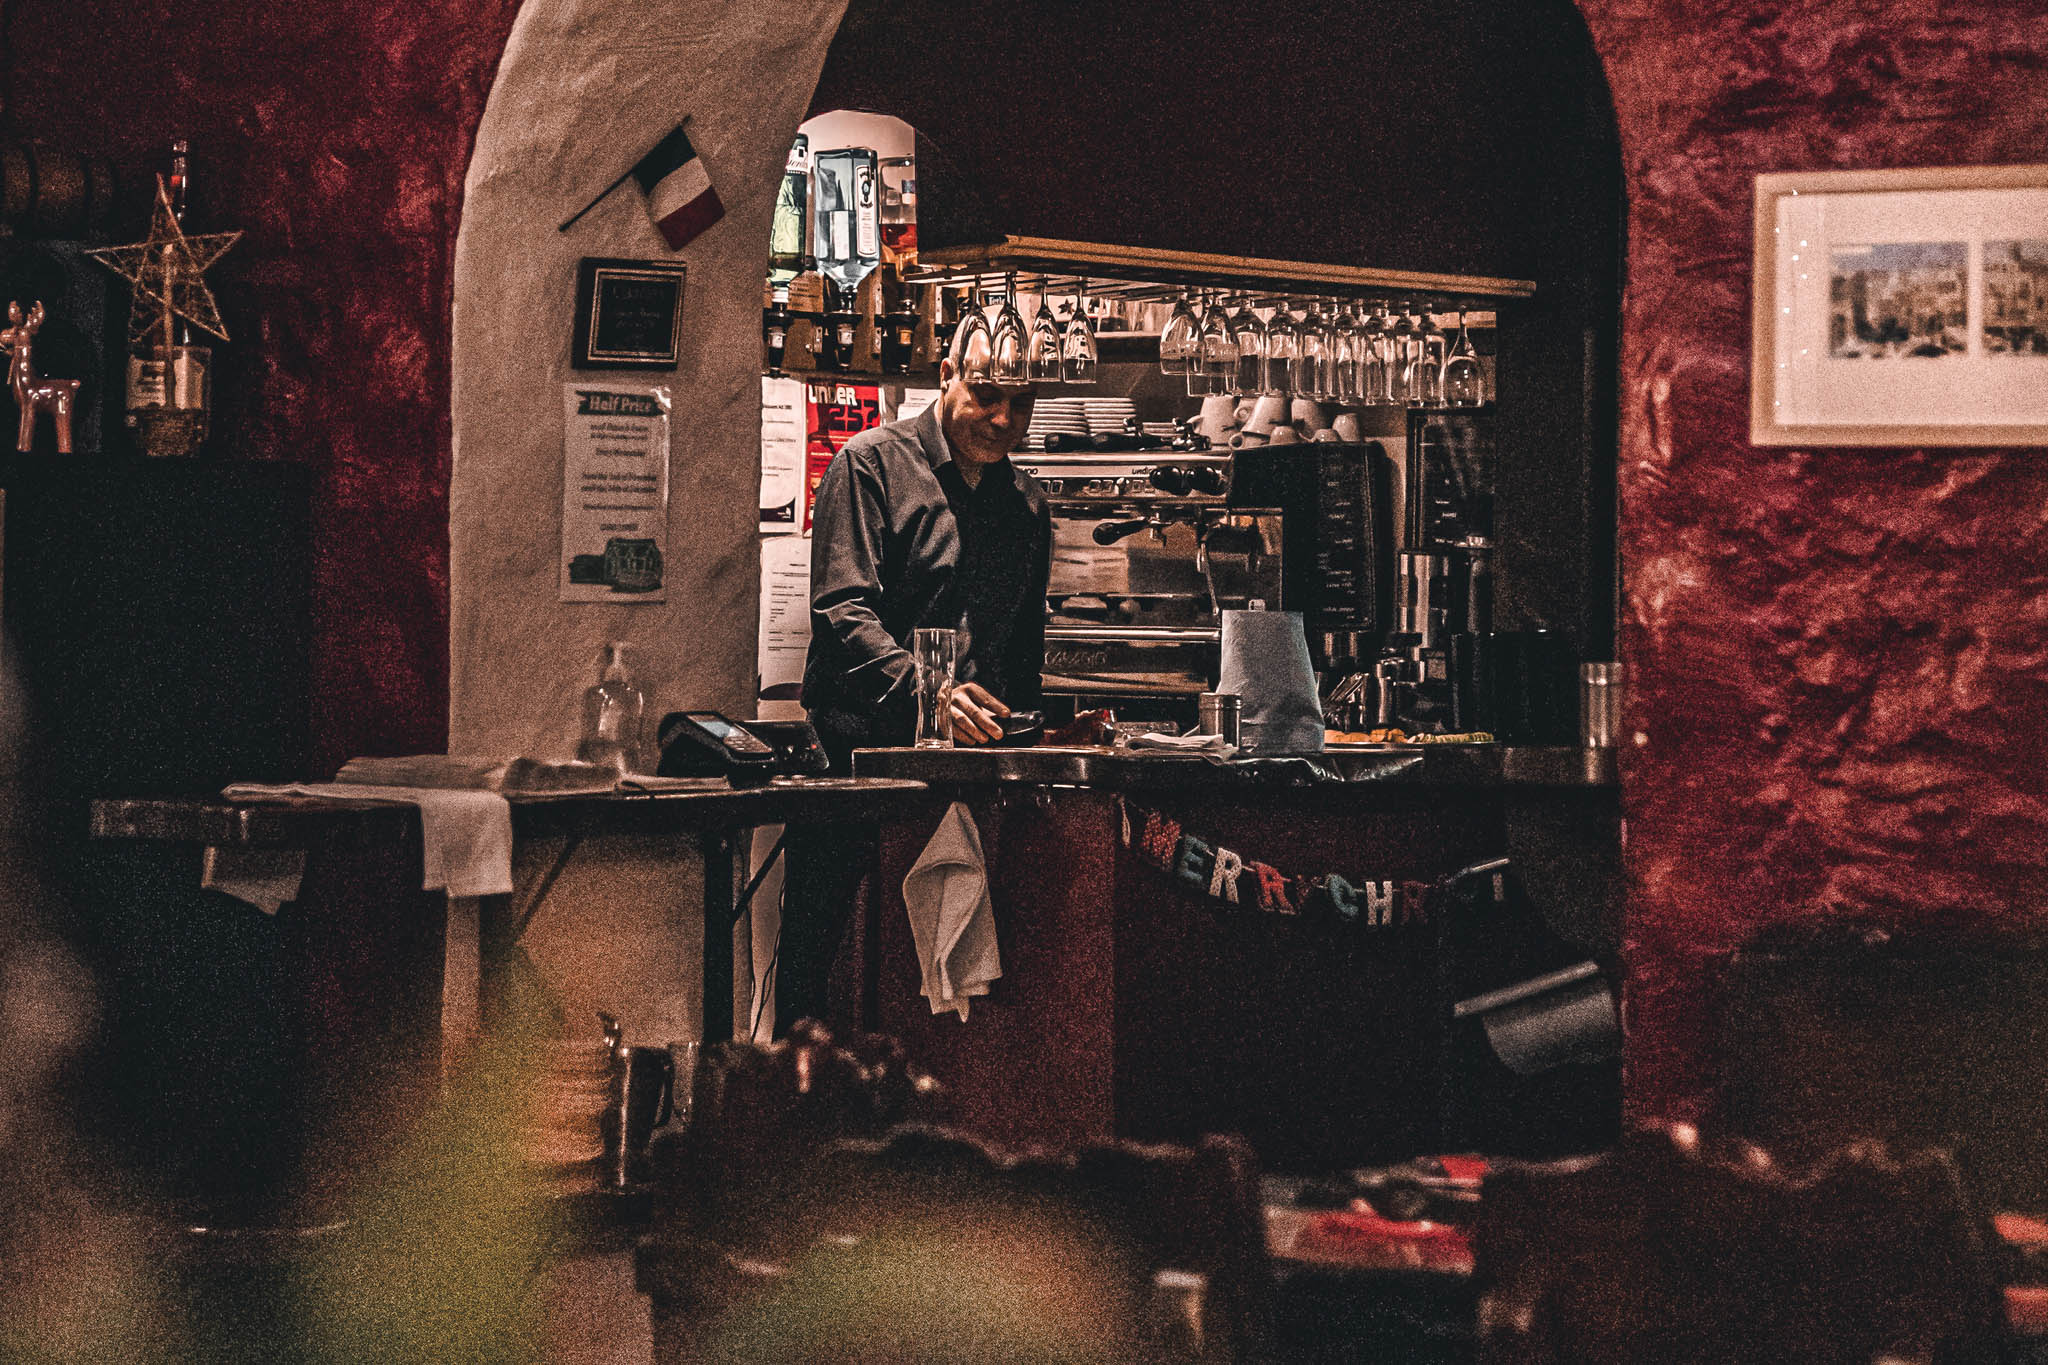 A bar tender standing at Claudio's in-house bar